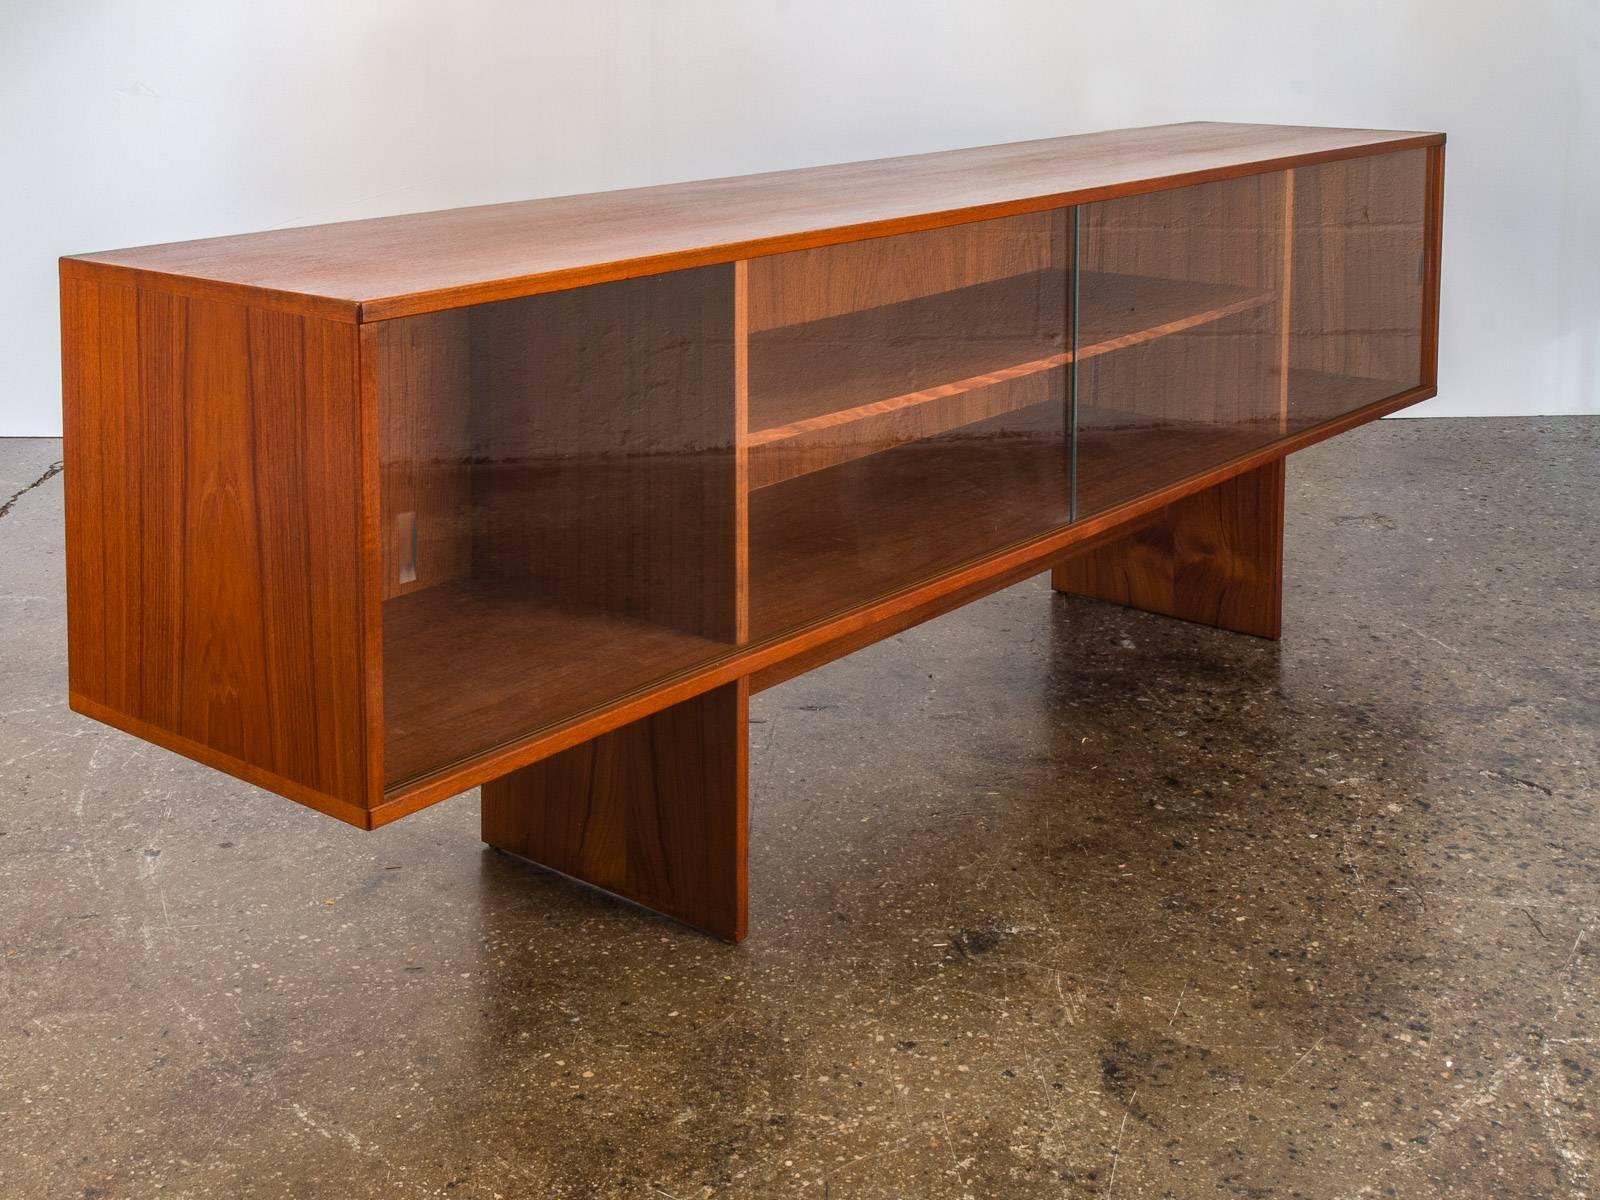 Jens Quistgaard media credenza for Peter Lovig by Dansk is a lovely sliding glass door unit crafted in teak. This piece is in excellent vintage condition with a lovely patina with age-appropriate wear. The wood selection is exquisite, with a